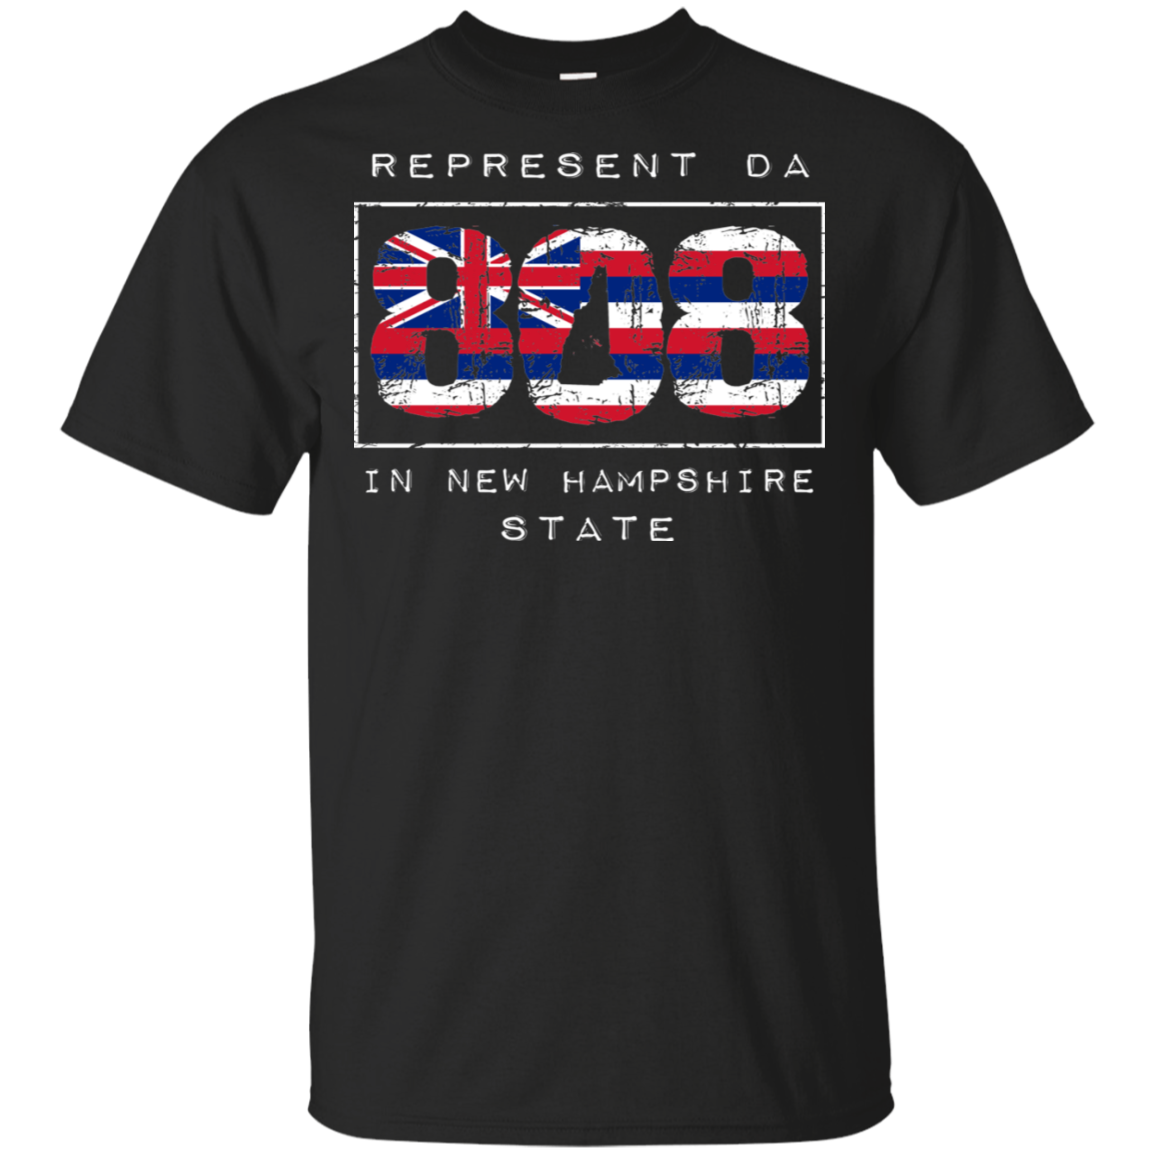 Rep Da 808 In New Hampshire State Ultra Cotton T-Shirt, T-Shirts, Hawaii Nei All Day